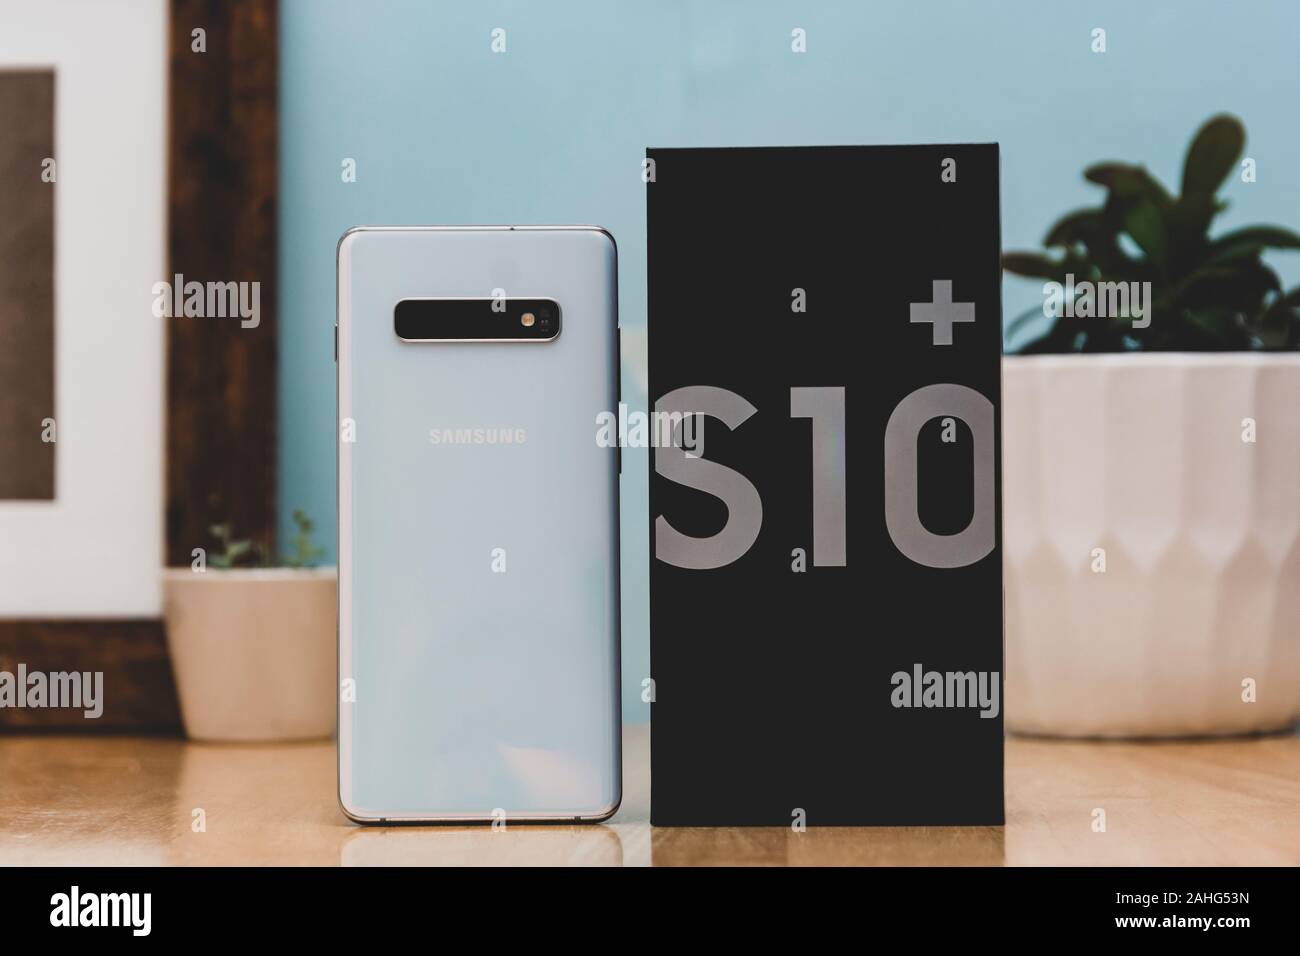 Corby, united Kingdom. December 25, 2019 - Samsung Galaxy S10 mobile phone, announcement of the new Samsung Galaxy S10 white, on blue background. Illu Stock Photo